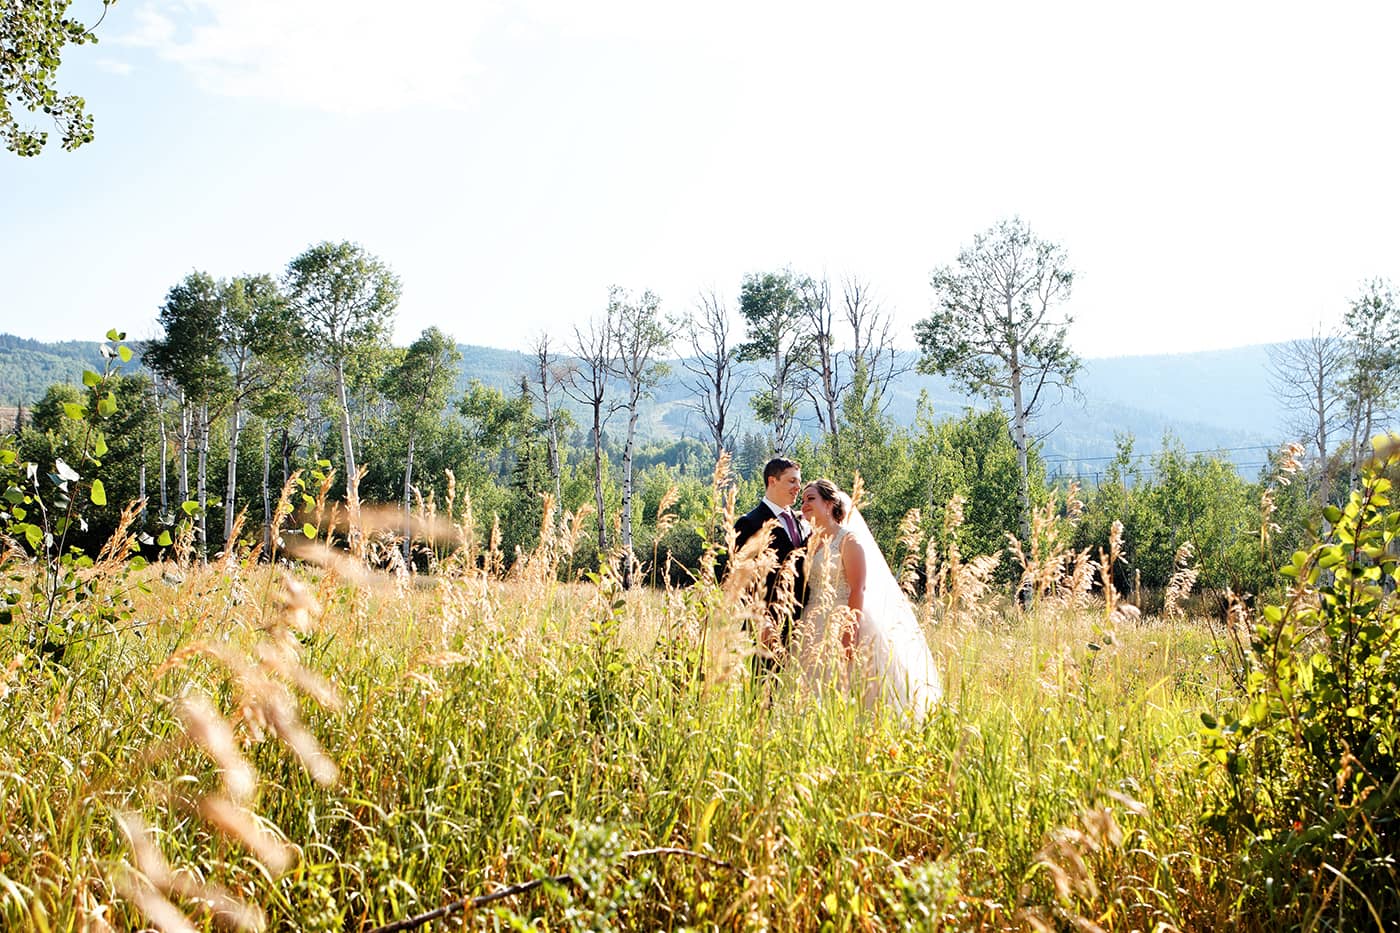 bride and groom in a grassy field.